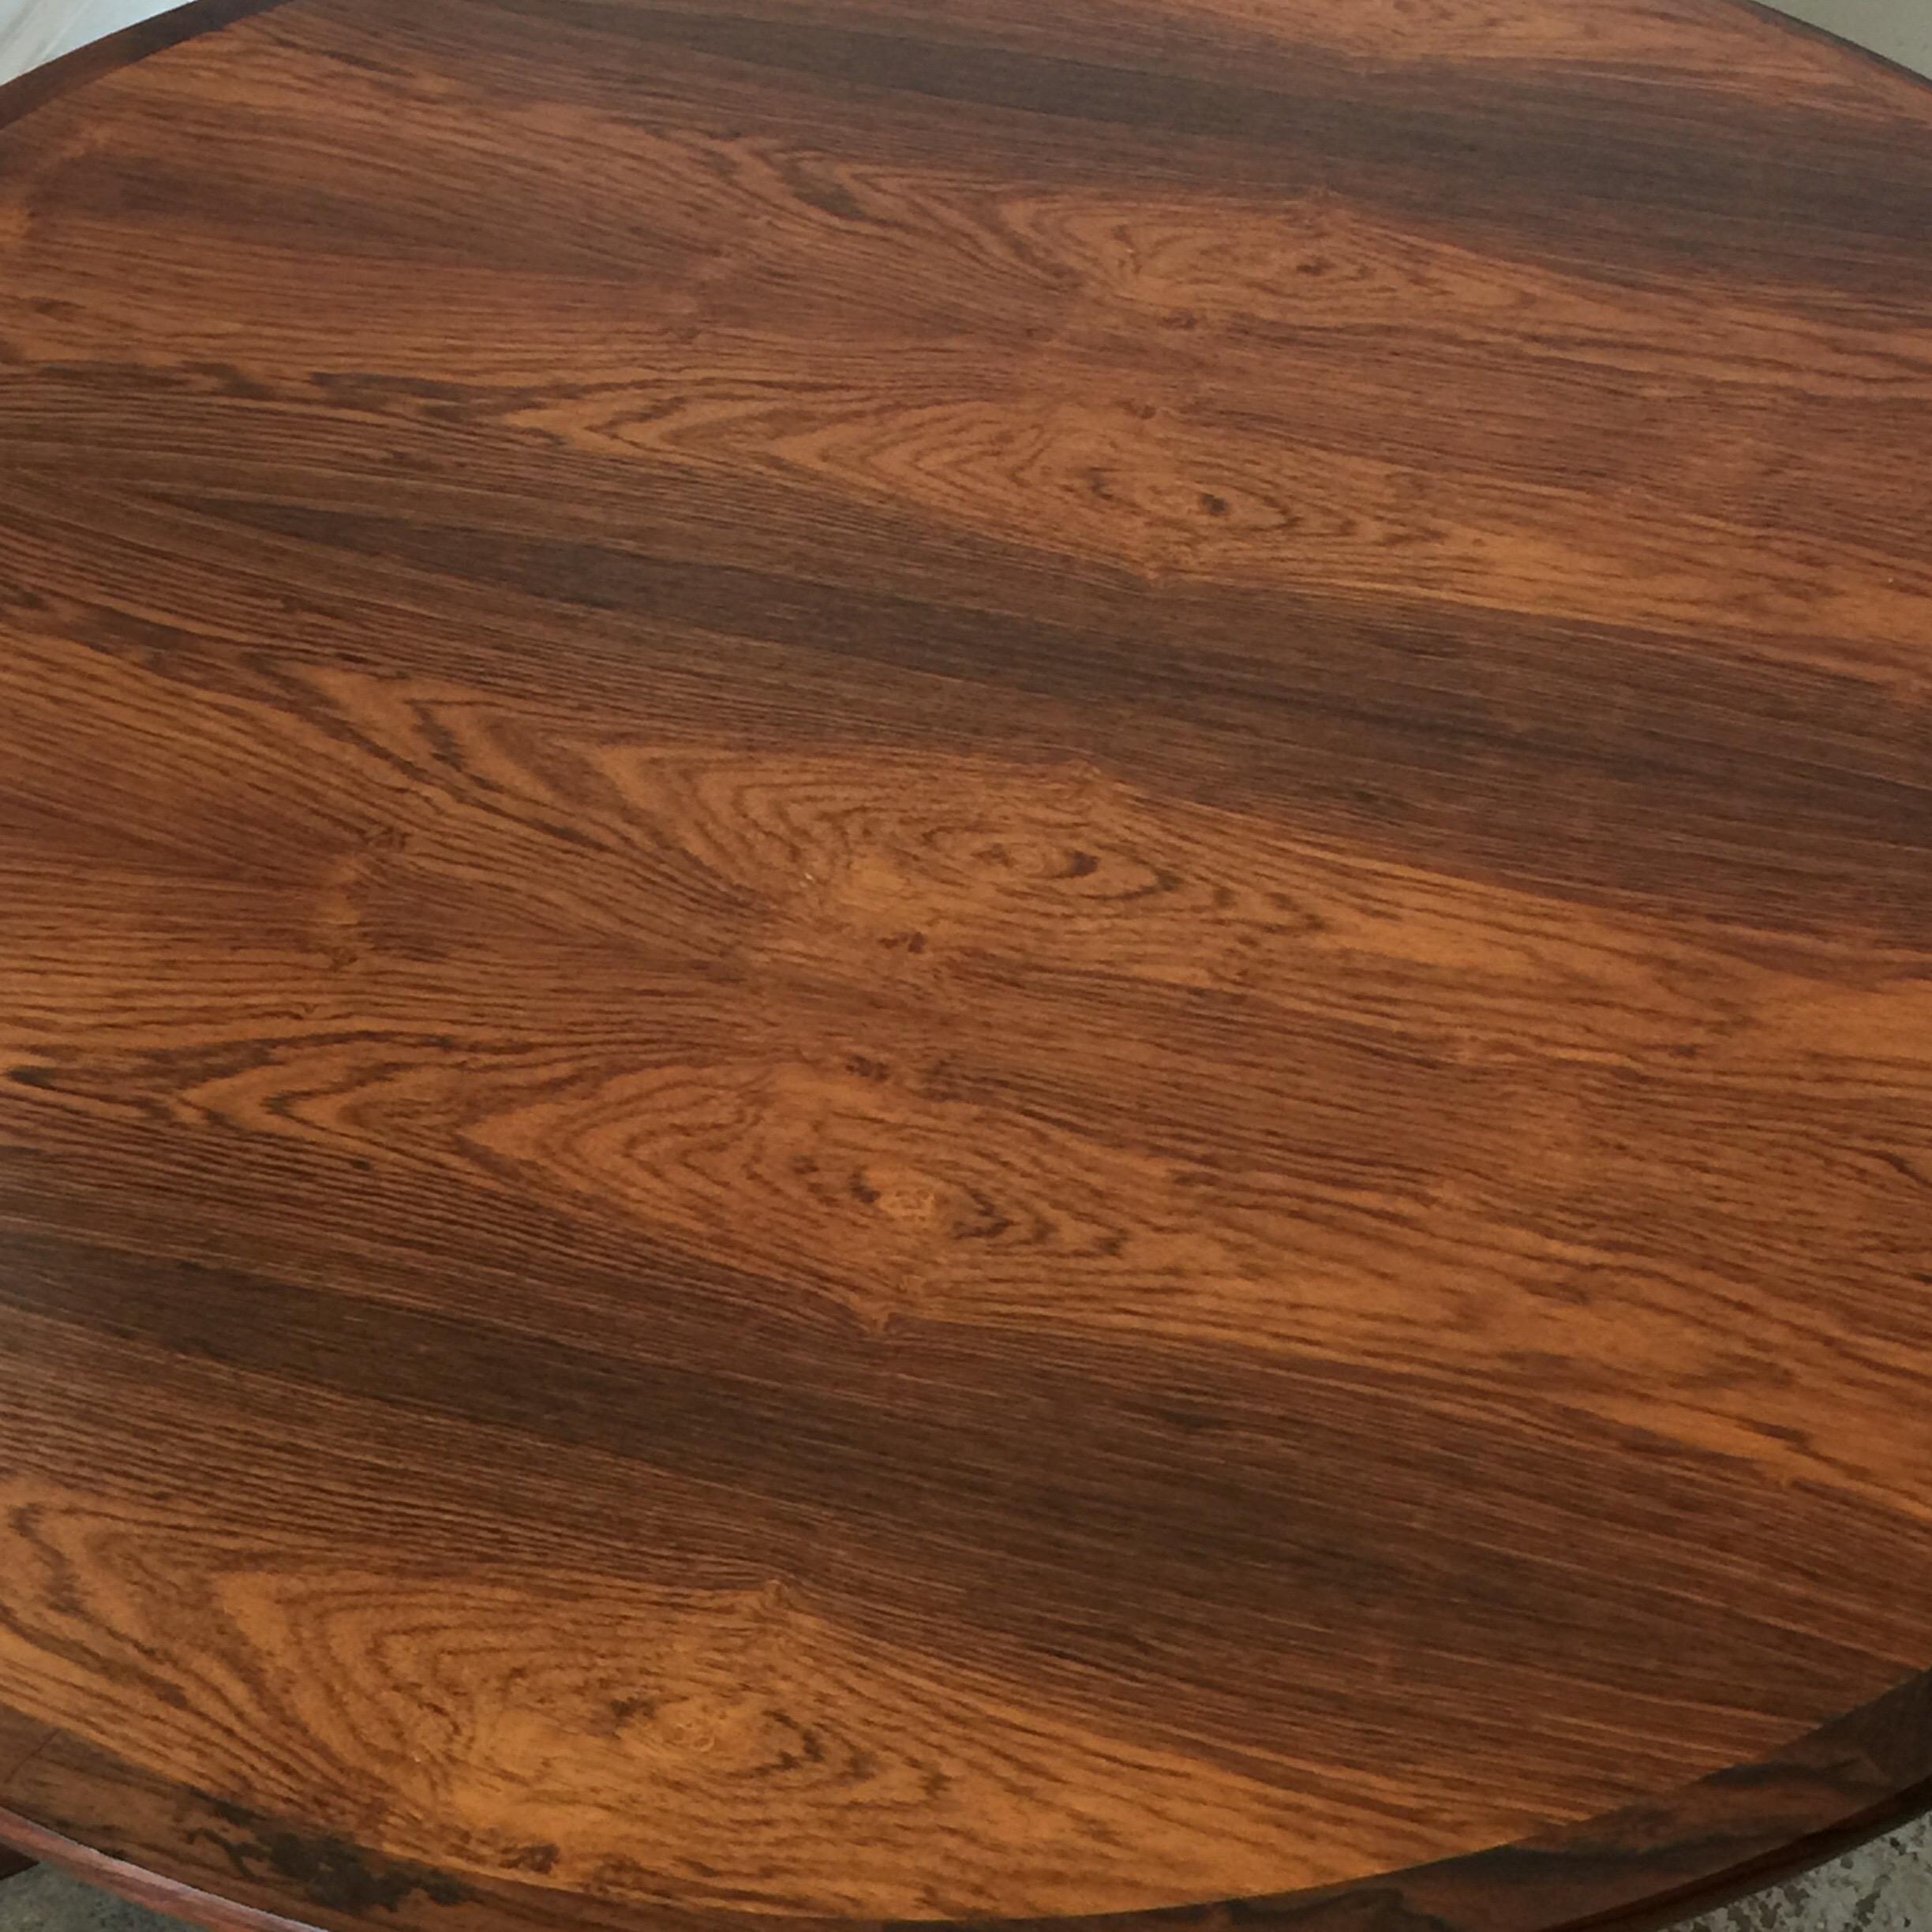 Impeccable Hans C. Andersen Danish Rosewood Round Coffee Table For Sale 1